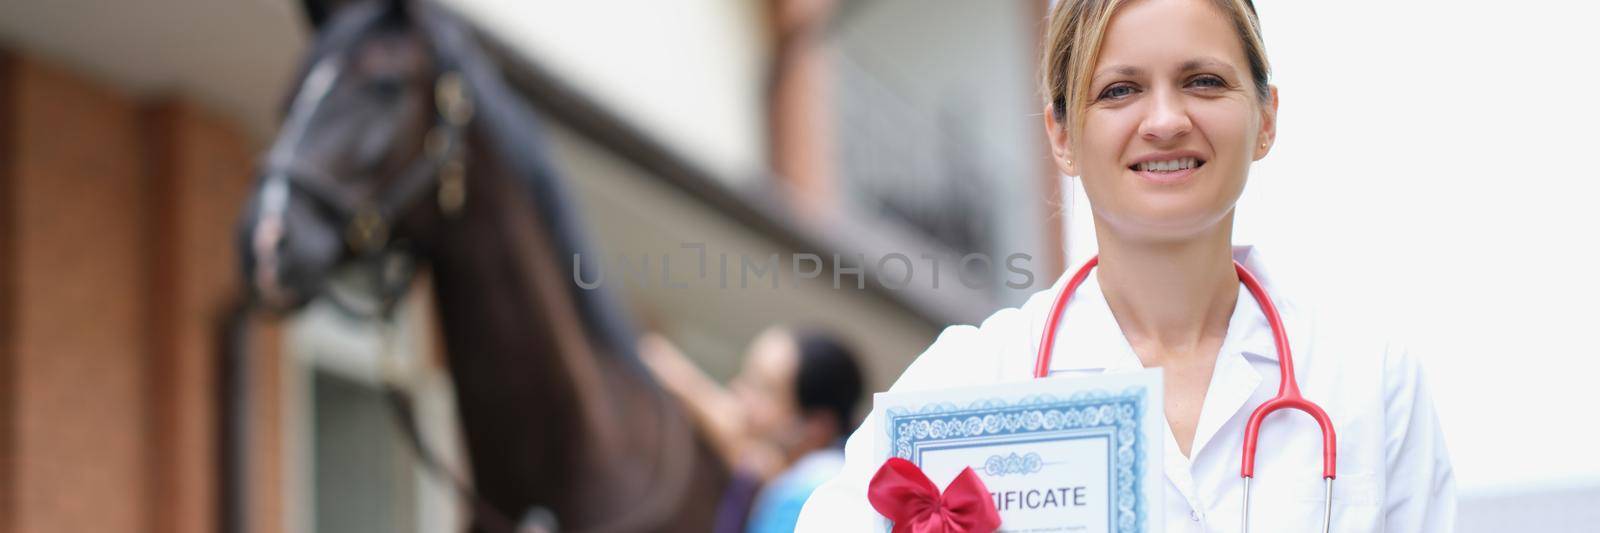 Portrait of smiling female veterinarian holding medical certificate against background of sport horse. Horses undergoing medical examination before competition concept